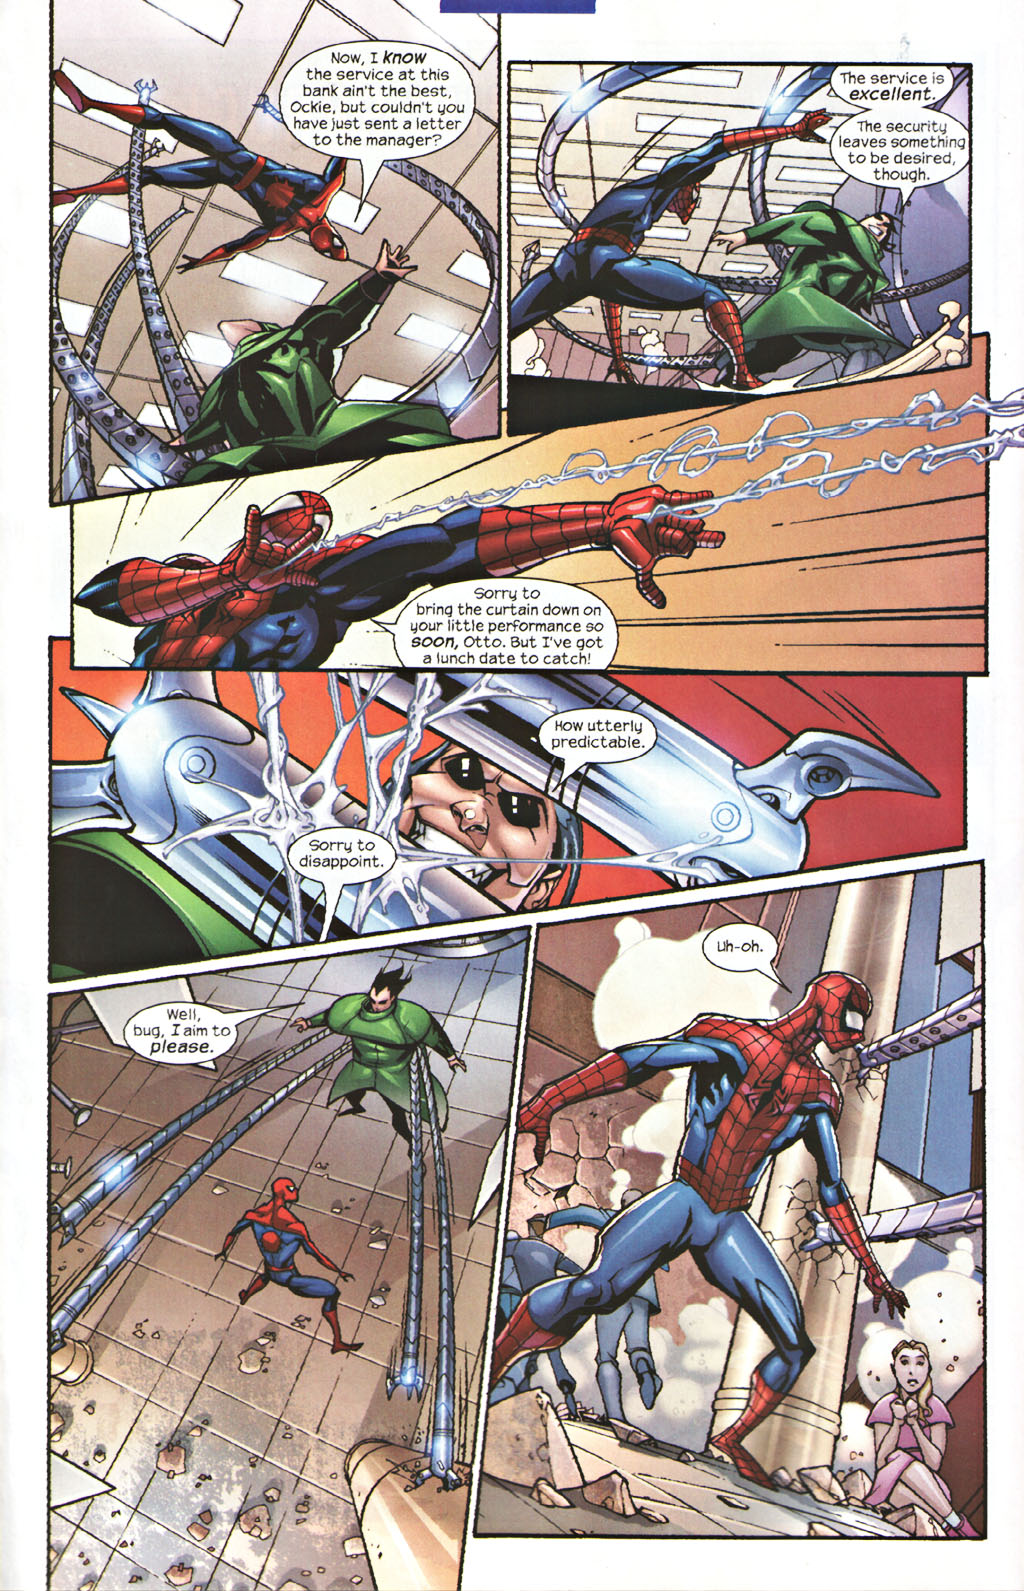 Spider Man Doctor Octopus Out Of Reach Issue 1 | Read Spider Man Doctor  Octopus Out Of Reach Issue 1 comic online in high quality. Read Full Comic  online for free -